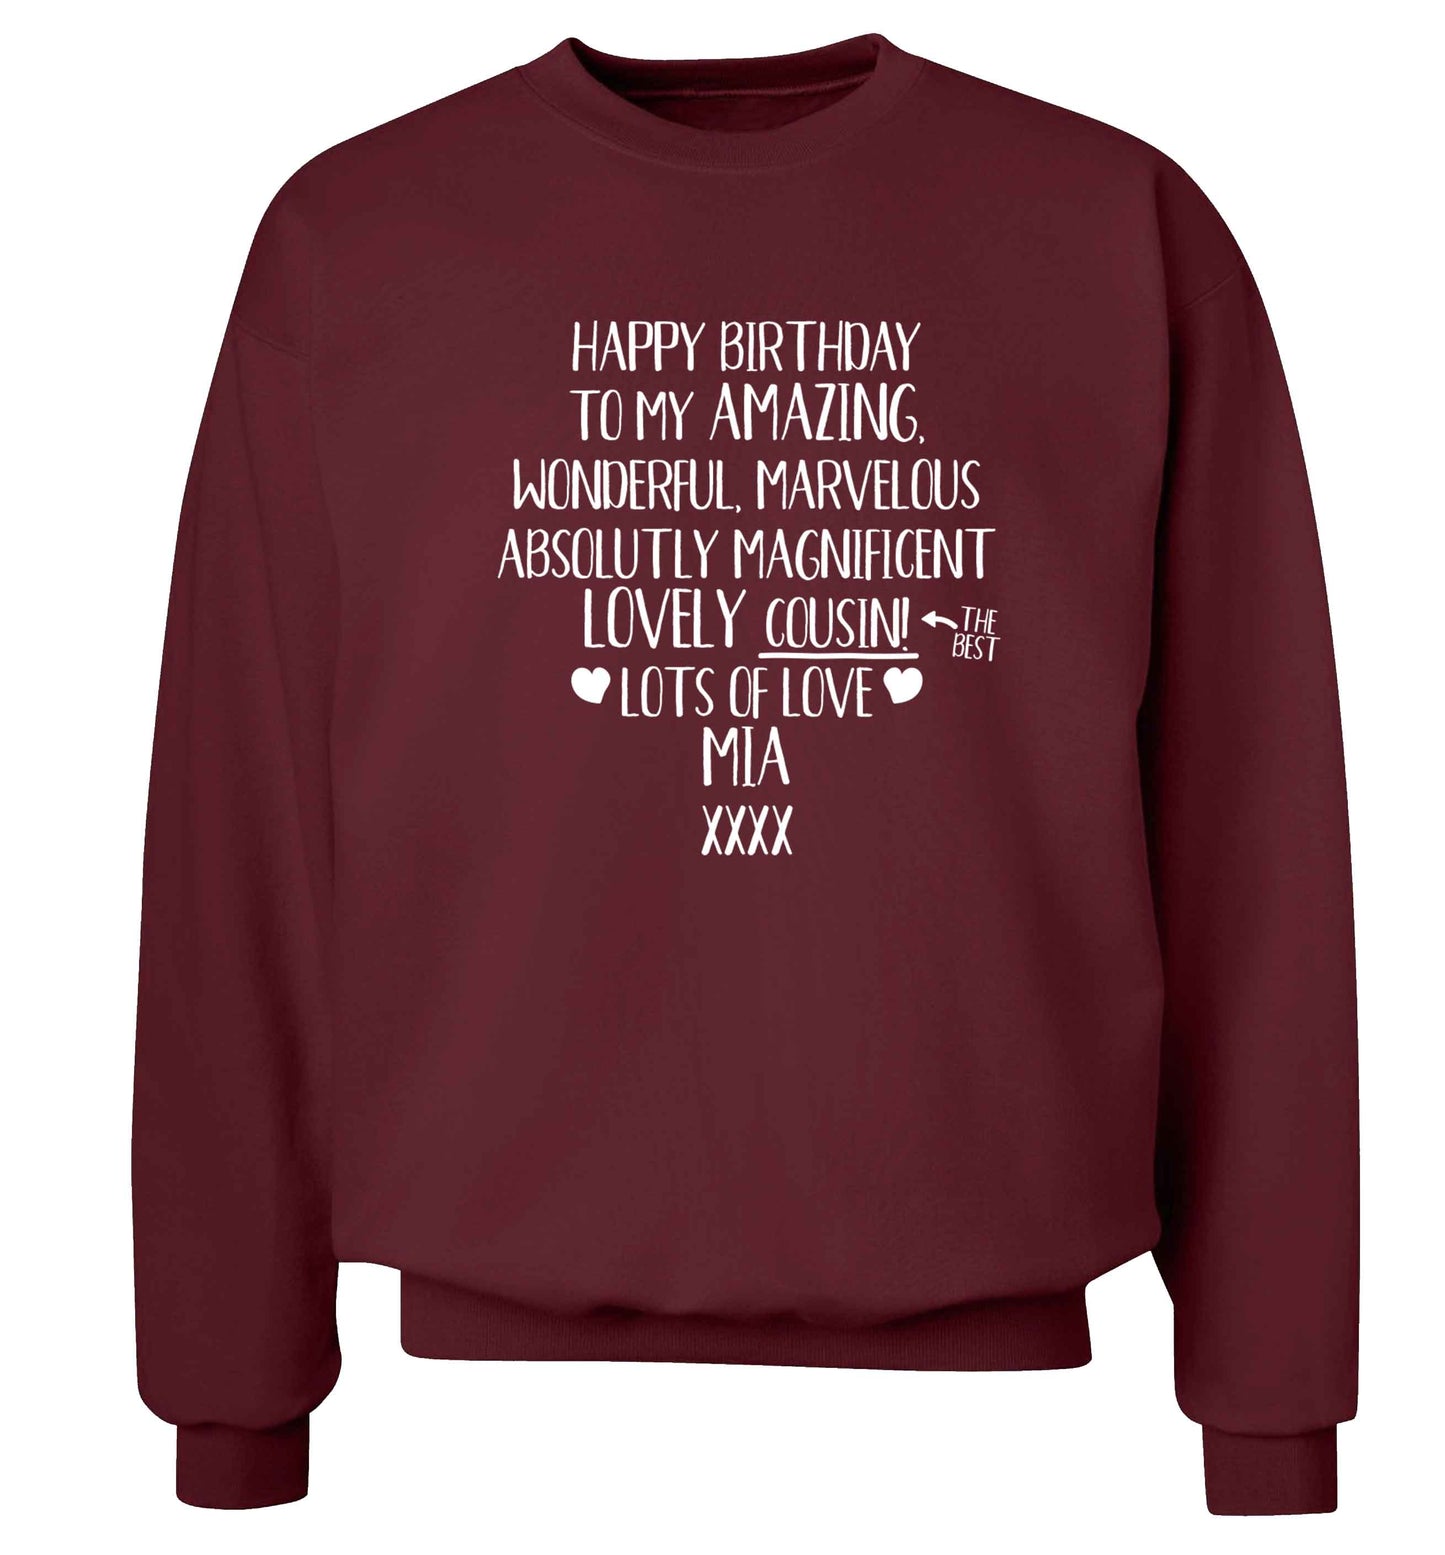 Personalised happy birthday to my amazing, wonderful, lovely cousin Adult's unisex maroon Sweater 2XL